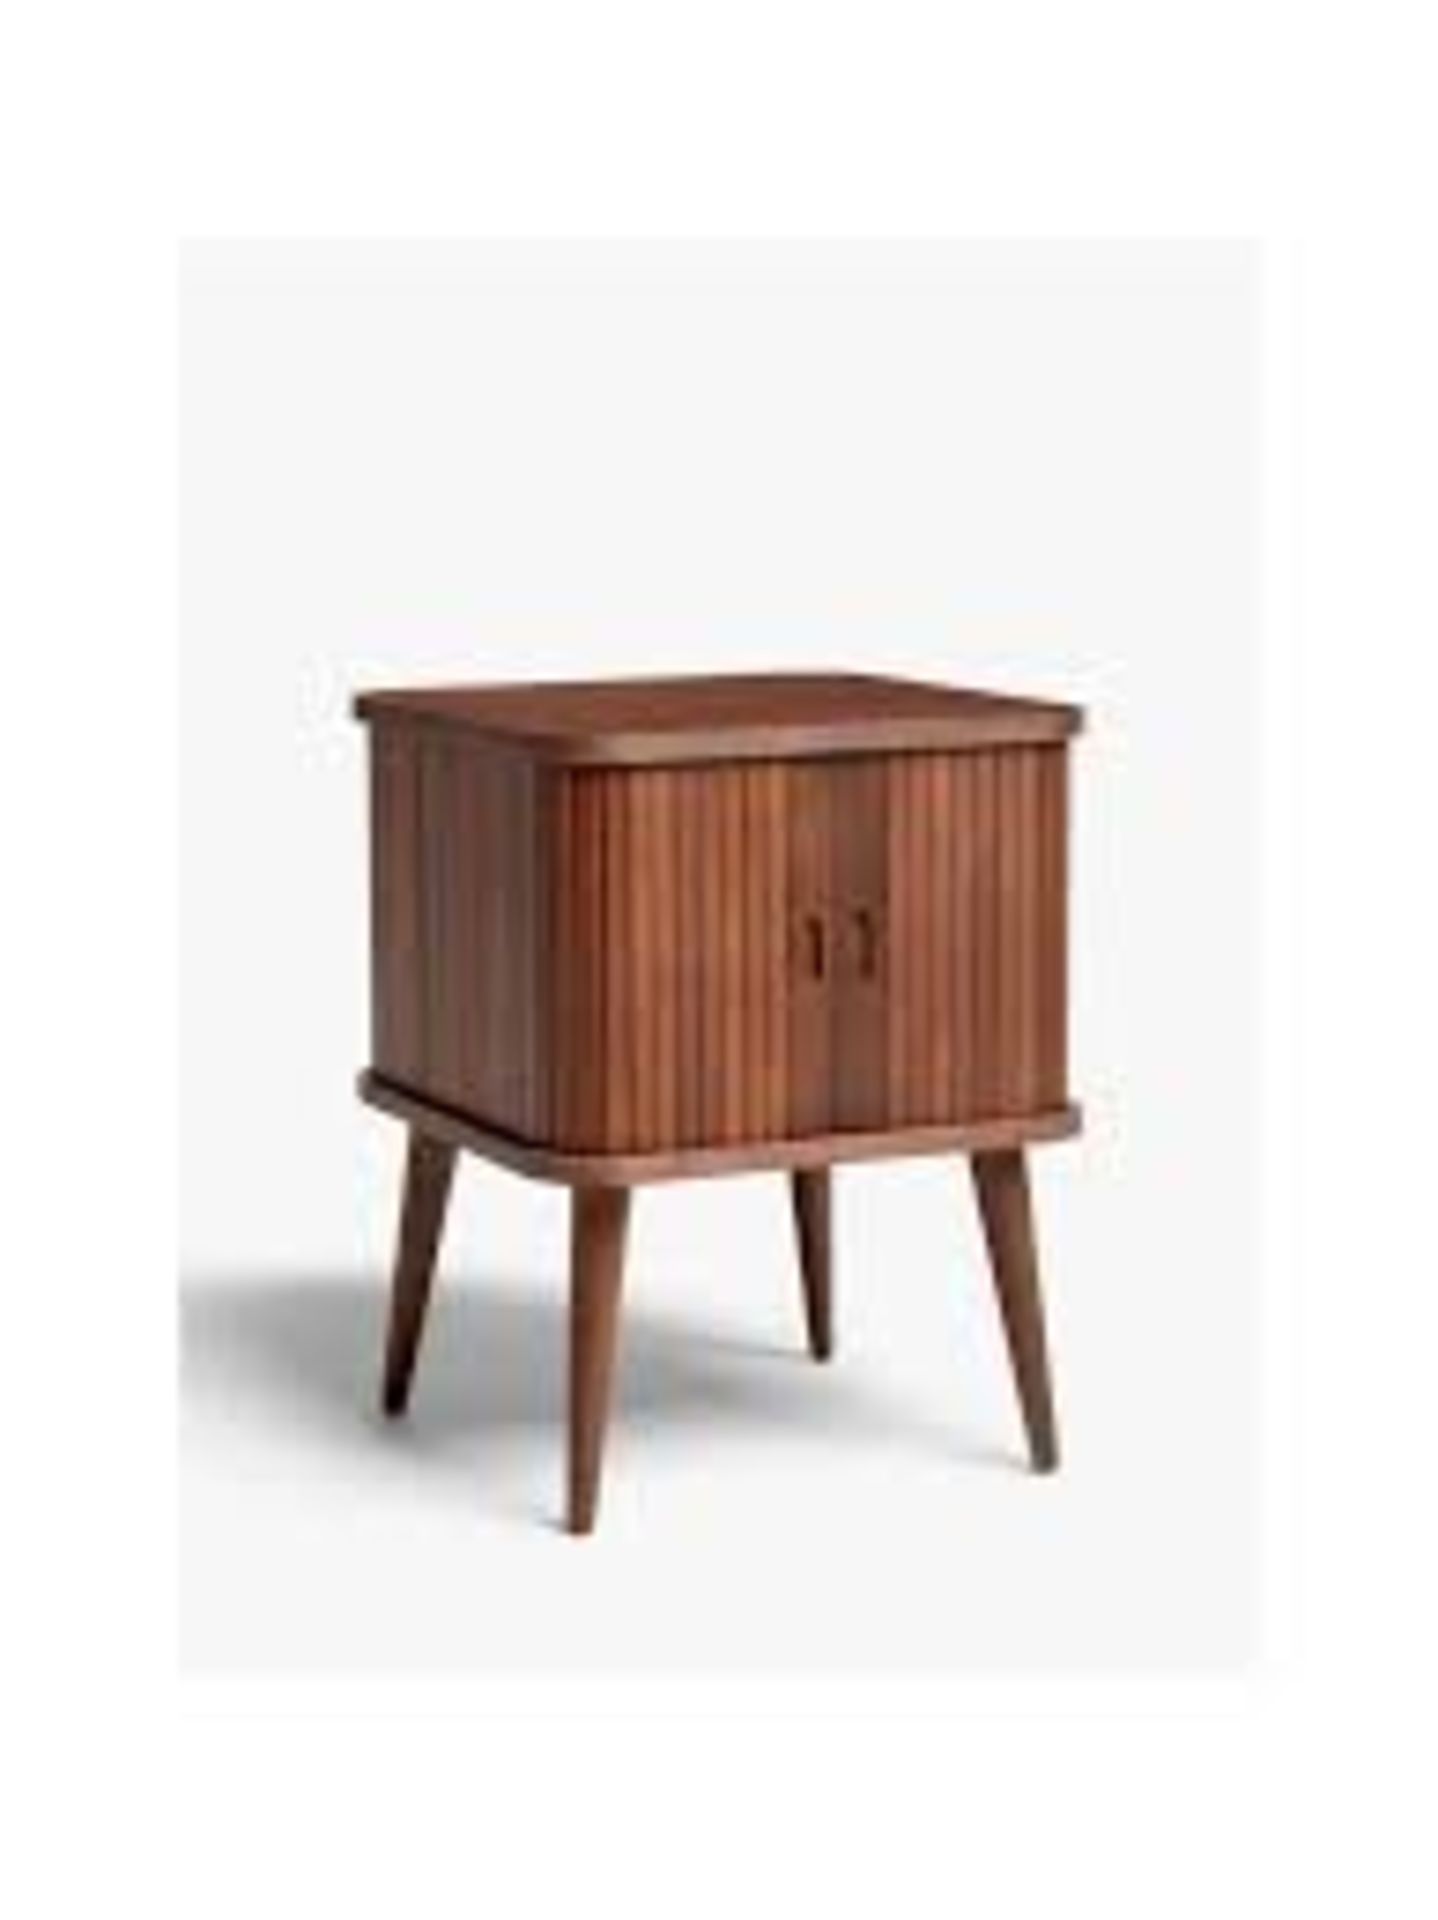 Boxed John Lewis And Partners Grayson Storage Side Table In Oak RRP £220 (BUN401840) (APPRAISALS